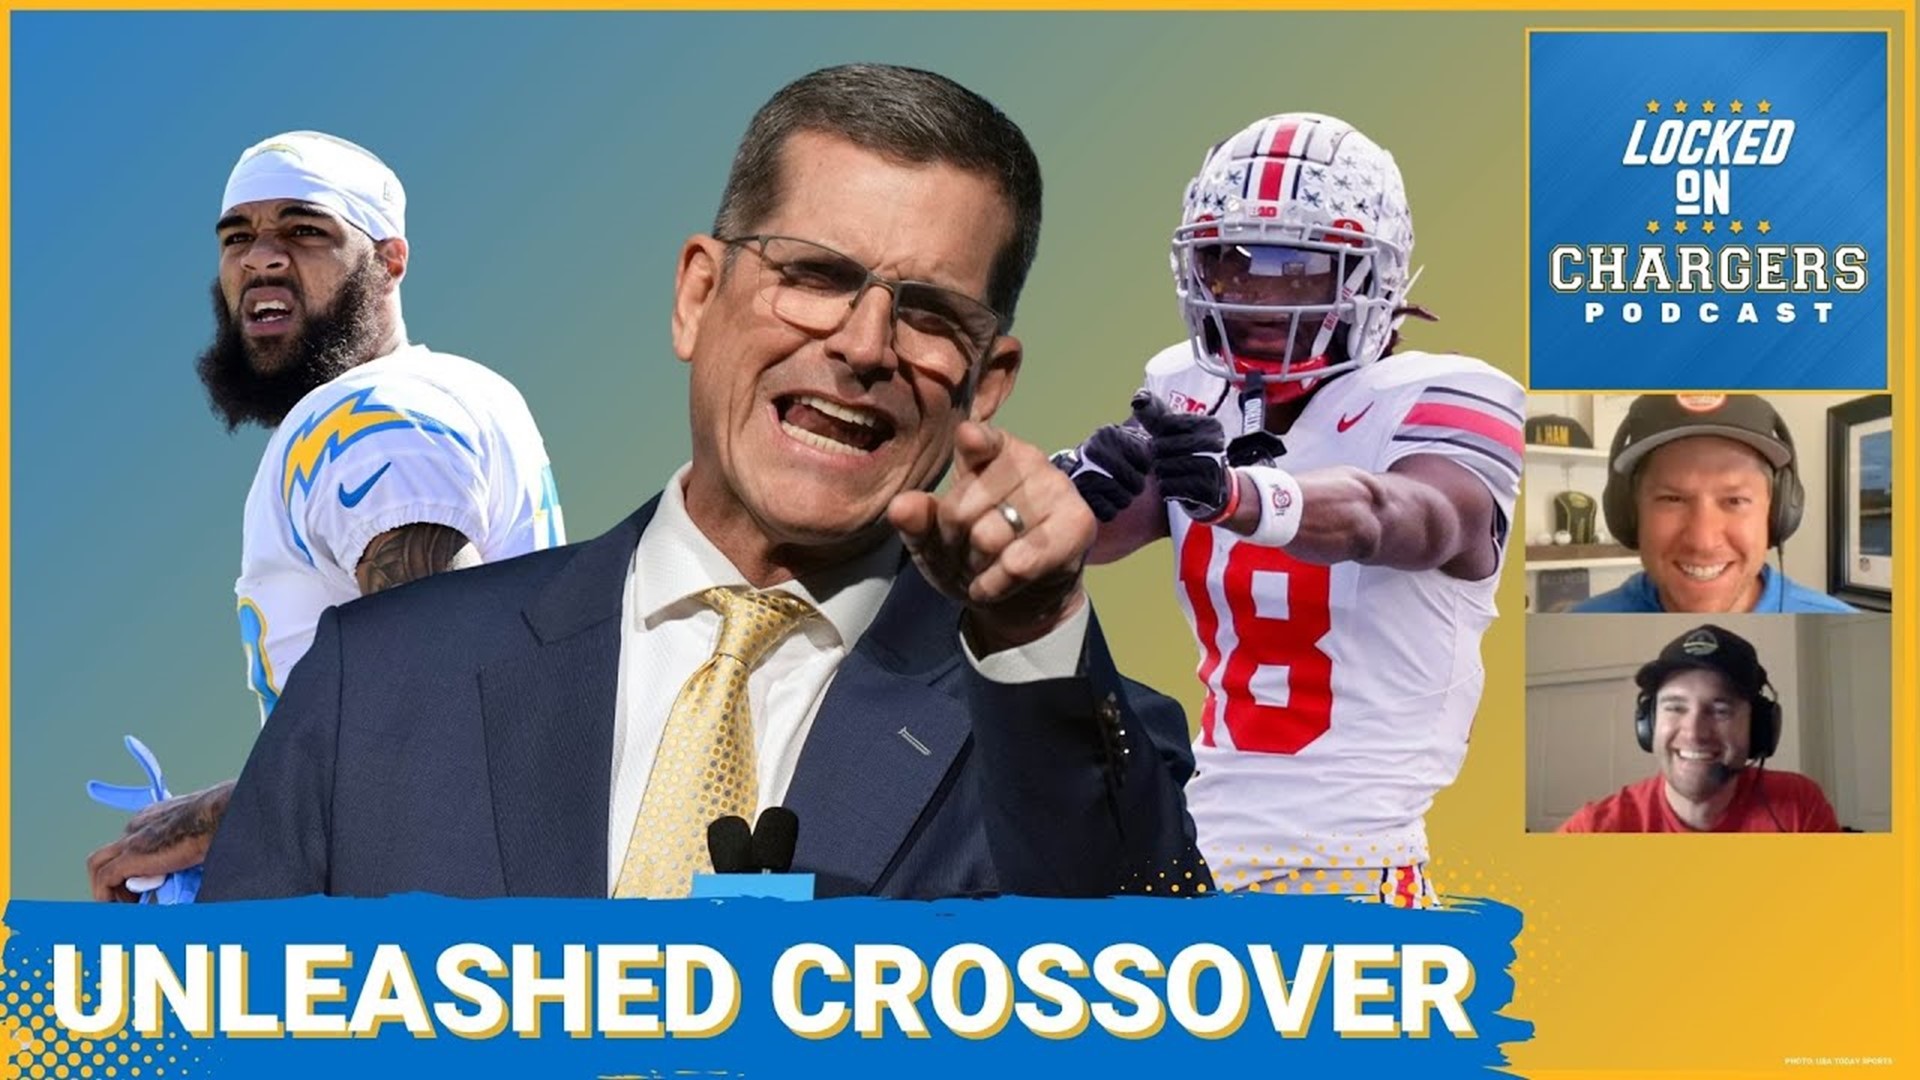 The Chargers offseason has been insane, and Dan Wolkenstein and Jake Hefner join to discuss the big changes so far under Jim Harbaugh.